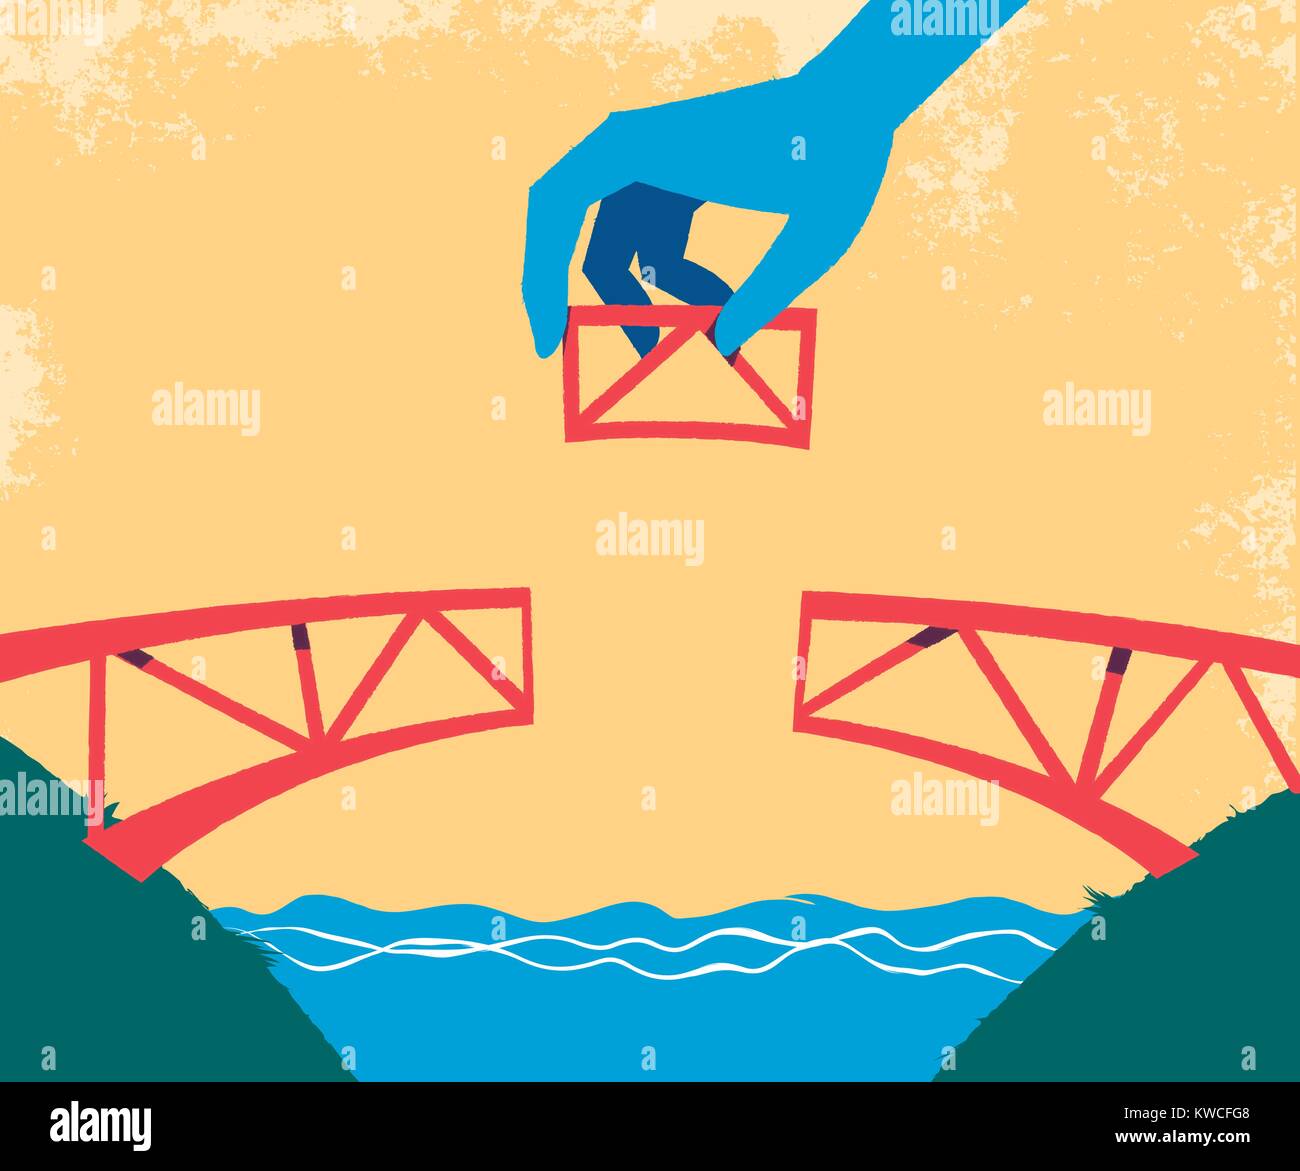 Hand complete the bridge with the last piece Stock Vector